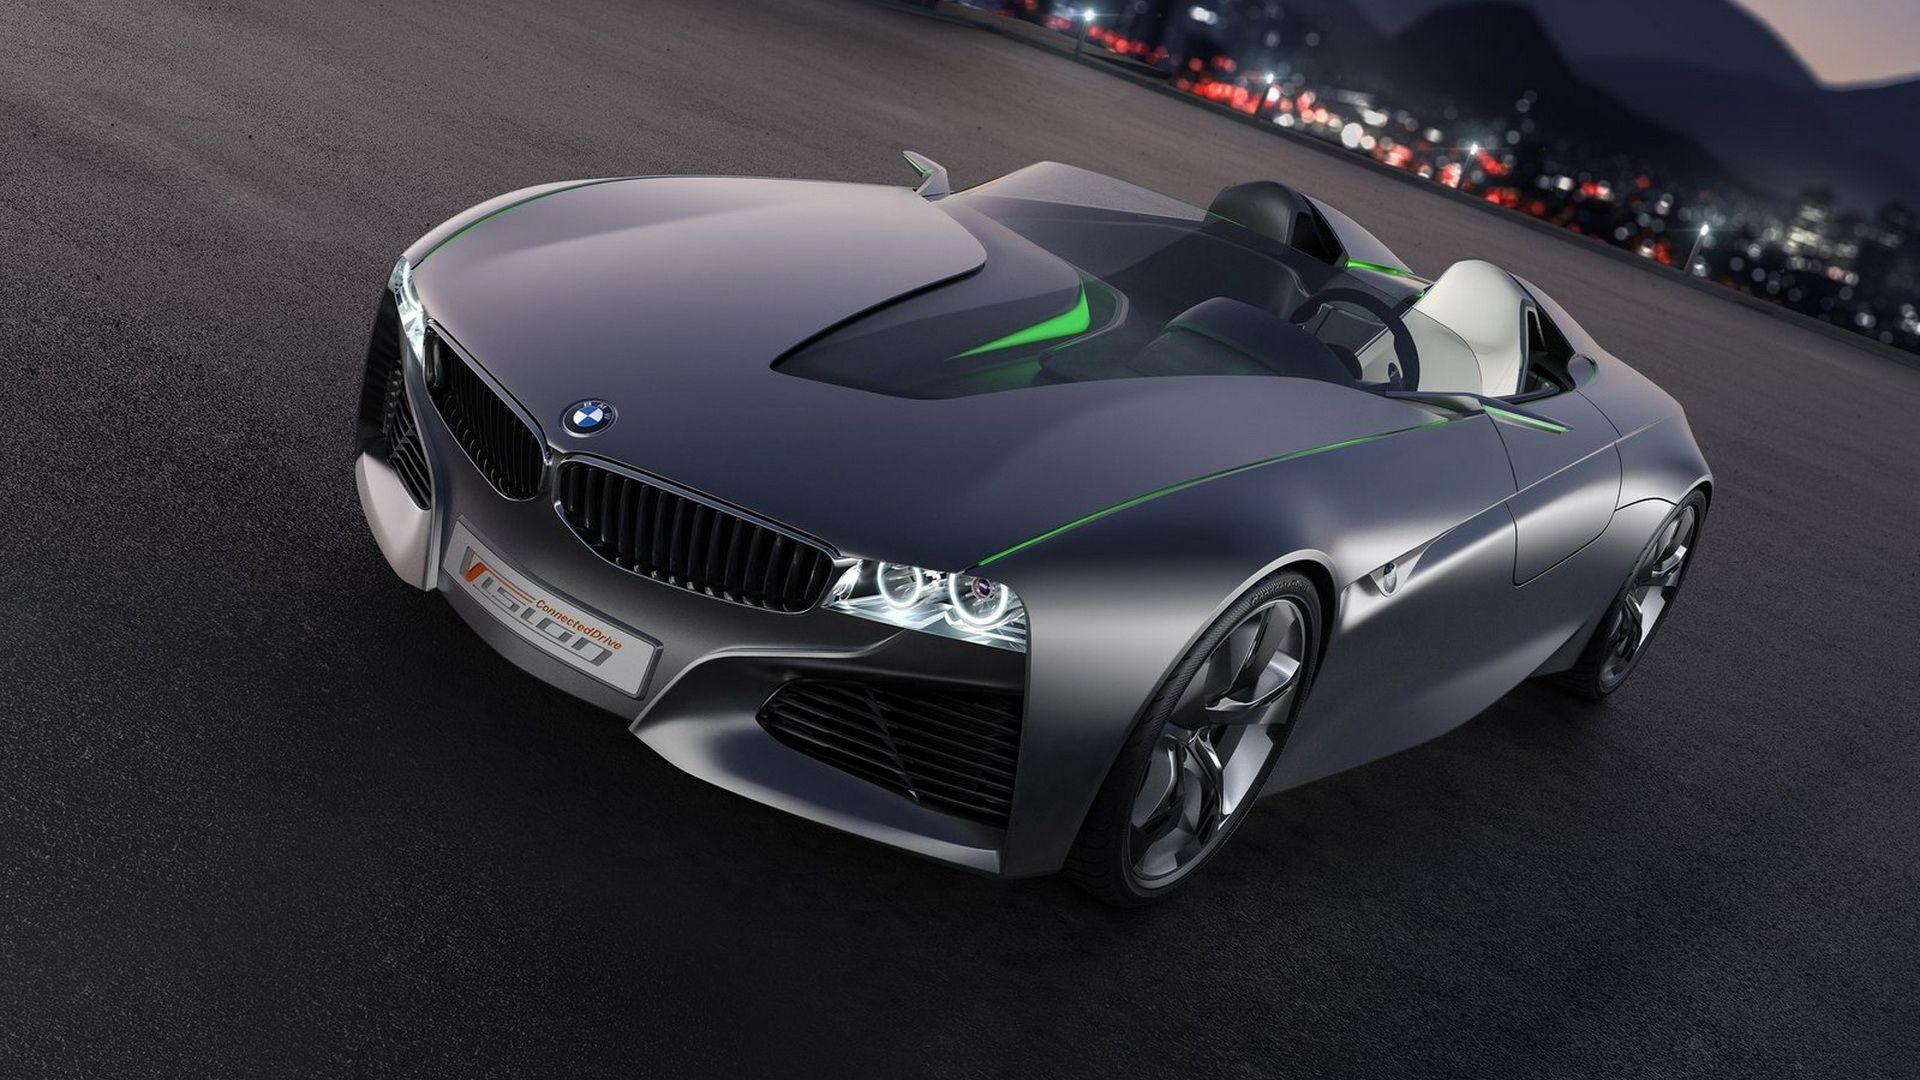 Widescreen Full HD P Bmw Car Charlie With High Resolution Of Laptop